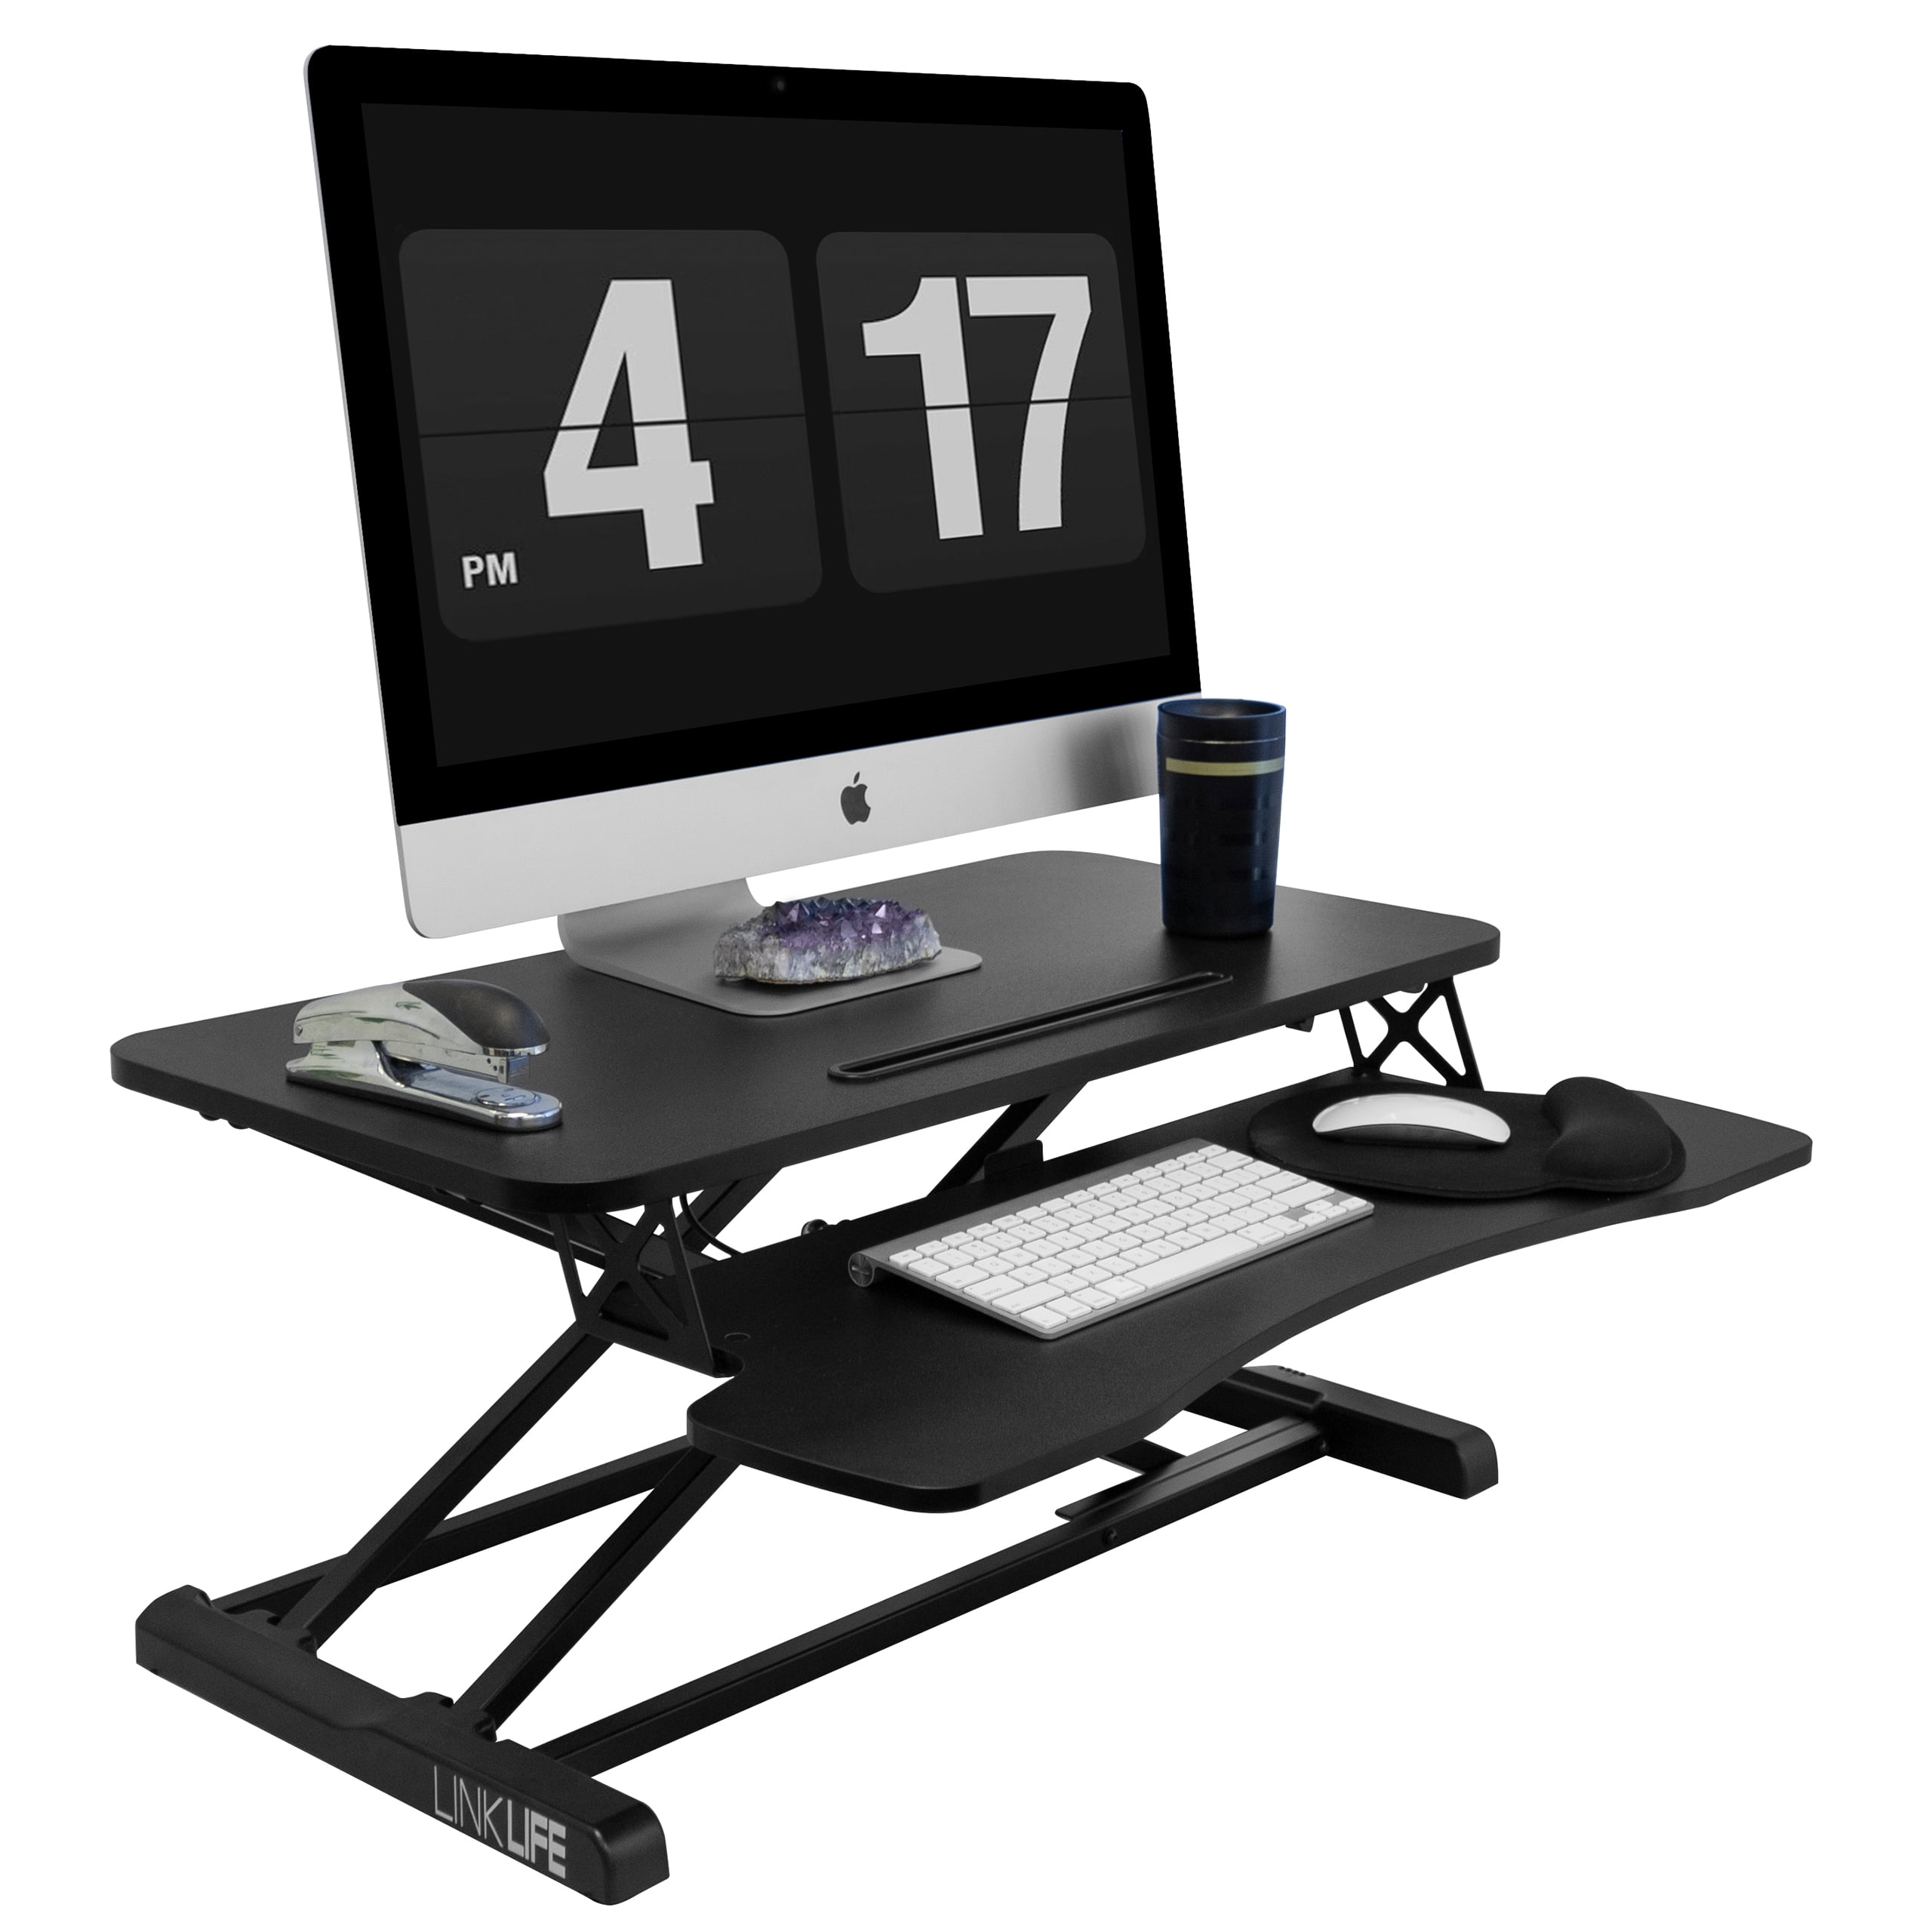 34 Inch Height Adjustable Stand Up Desk Riser Glorider Standing Desk Converter Tablet Holder and Gas Spring for Home& Office Sit to Stand Desktop Workstation with Keyboard Tray 